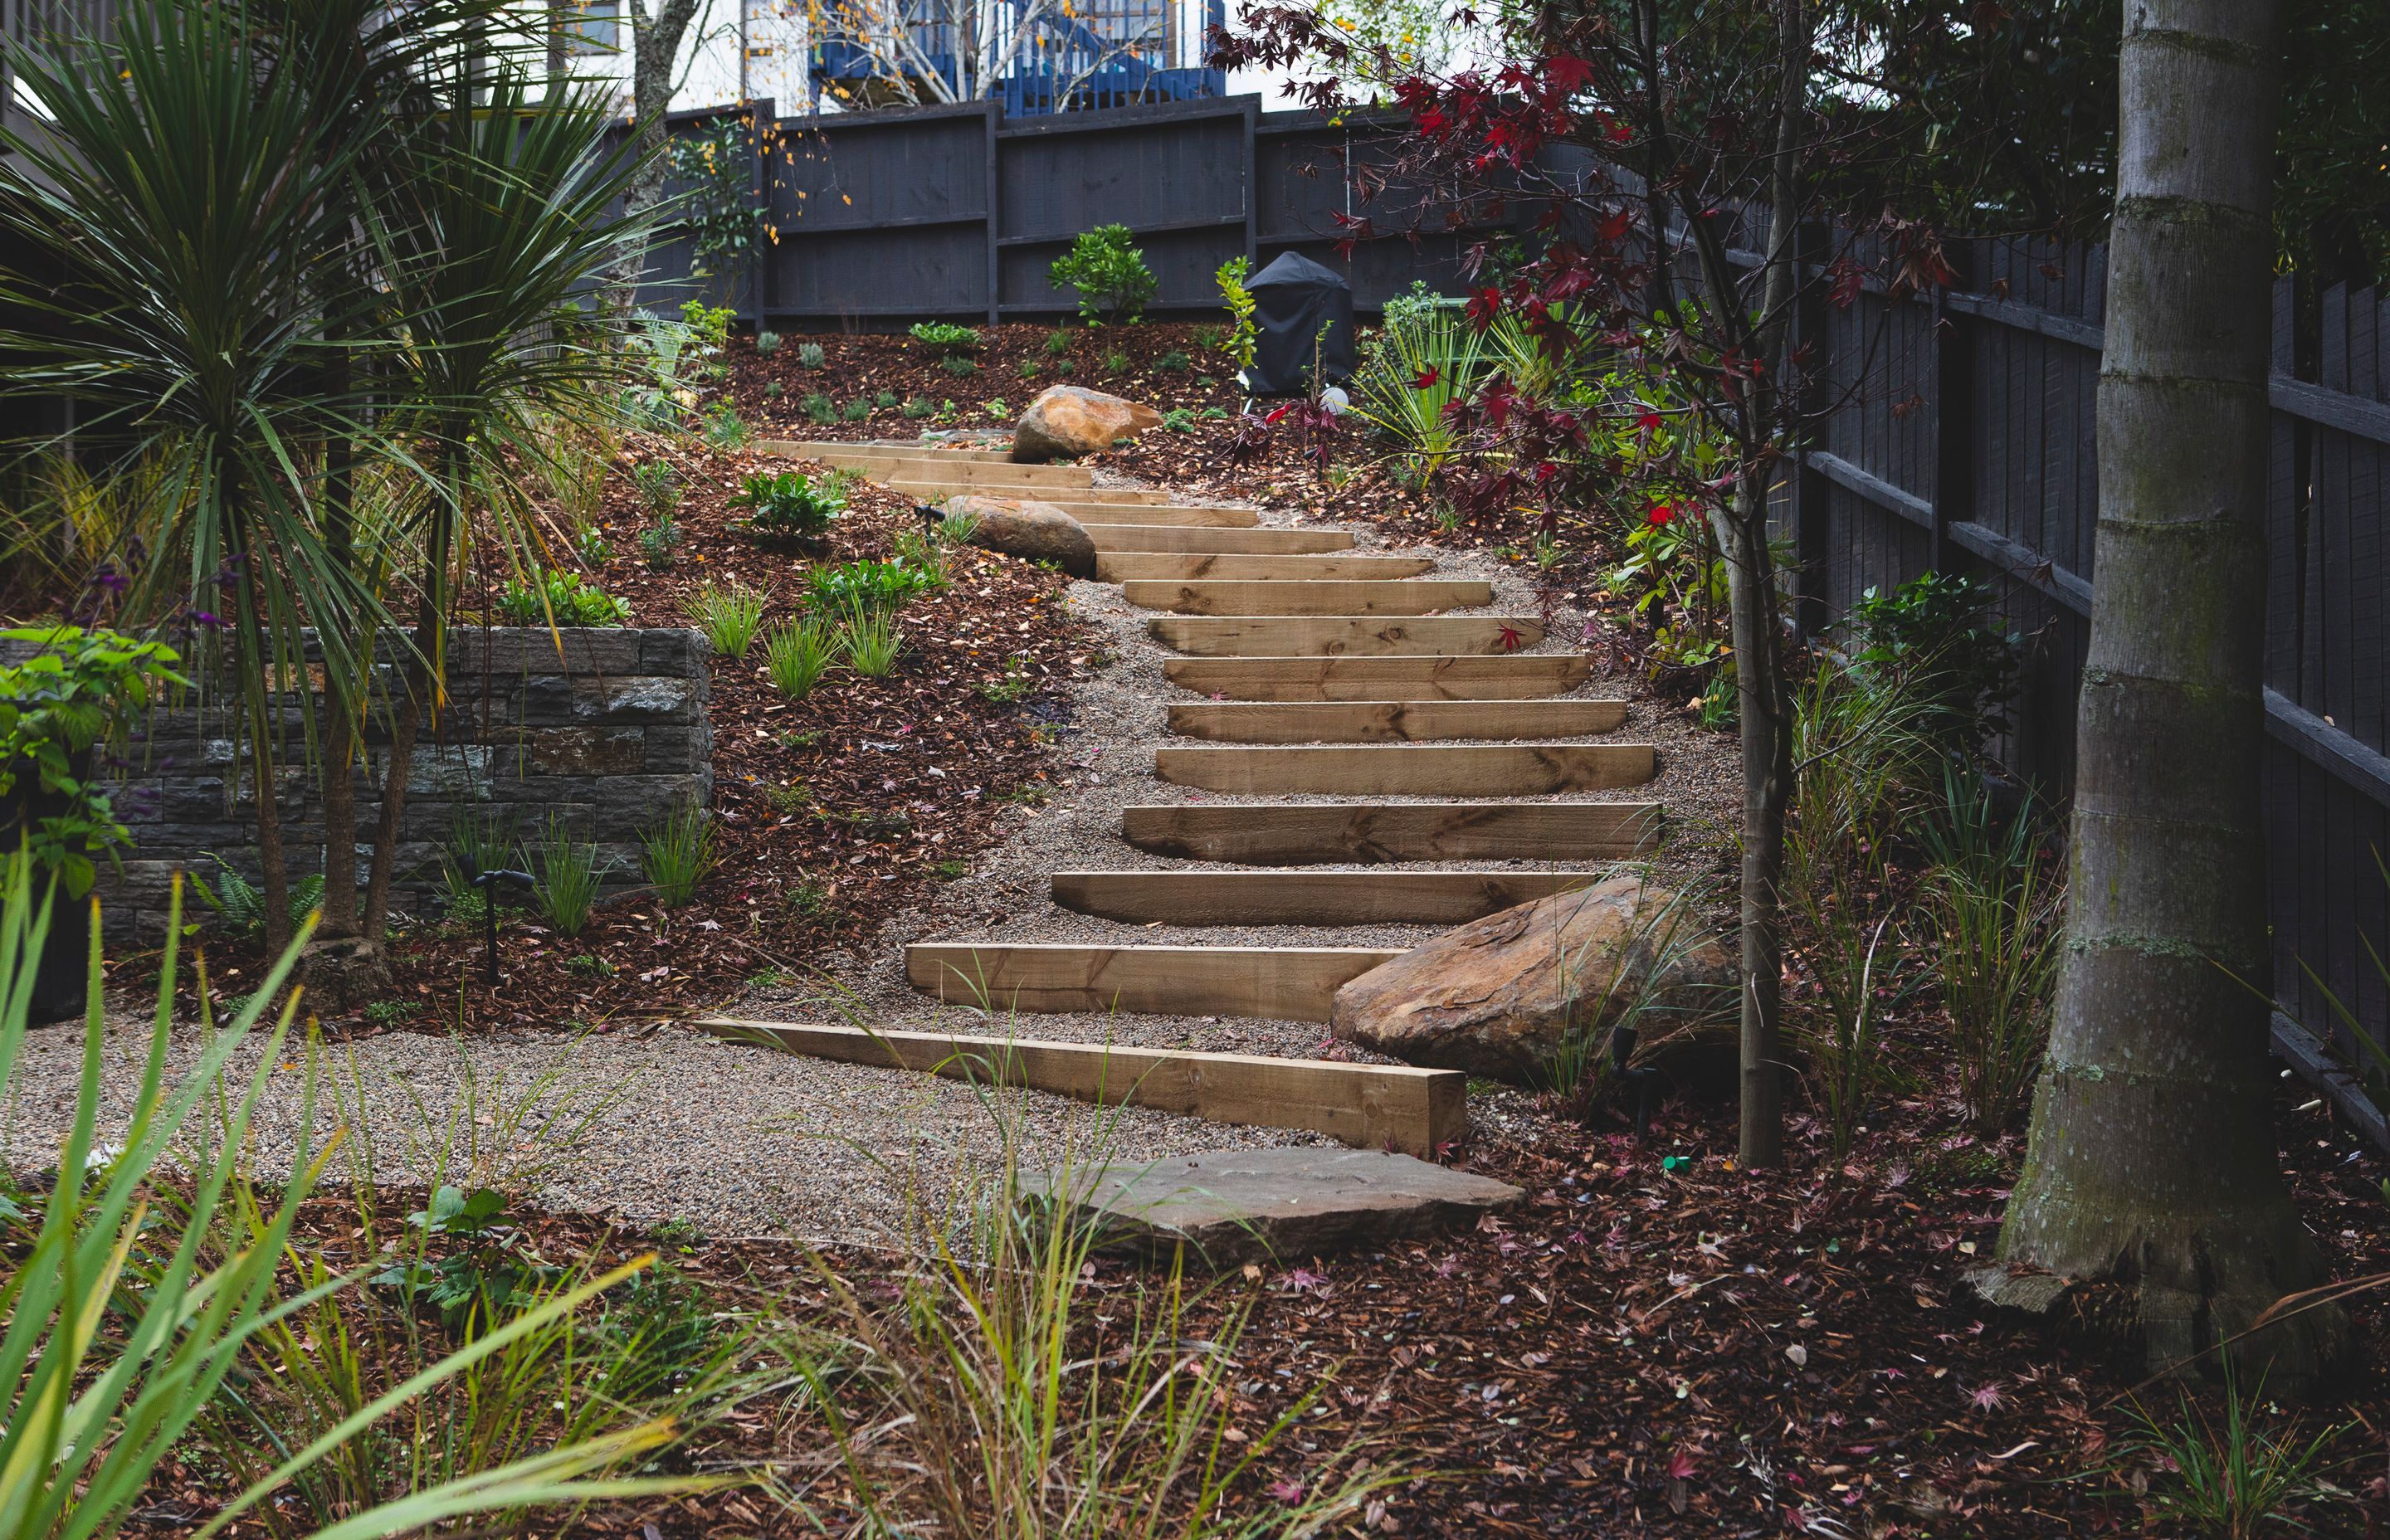 Feature Landscapes ensures it partners with contractors that minimise the impact on the environment.